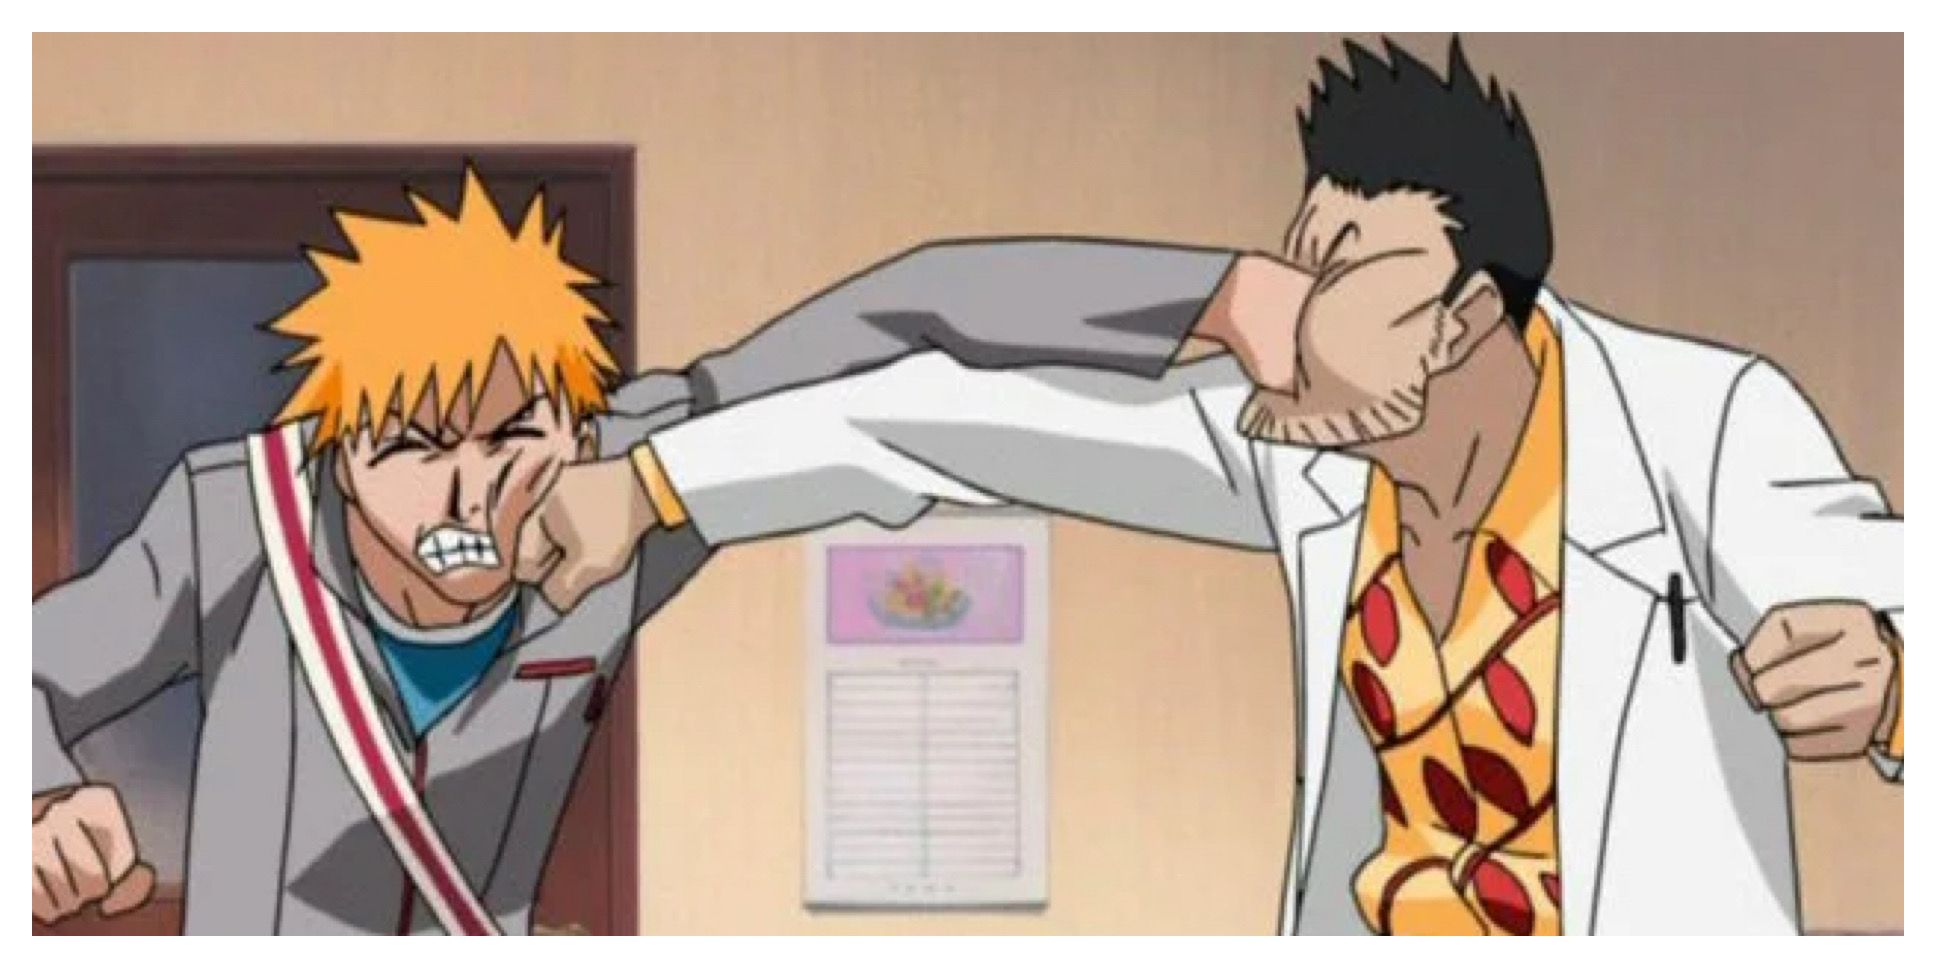 Ichigo and Isshin from Bleach punch each other